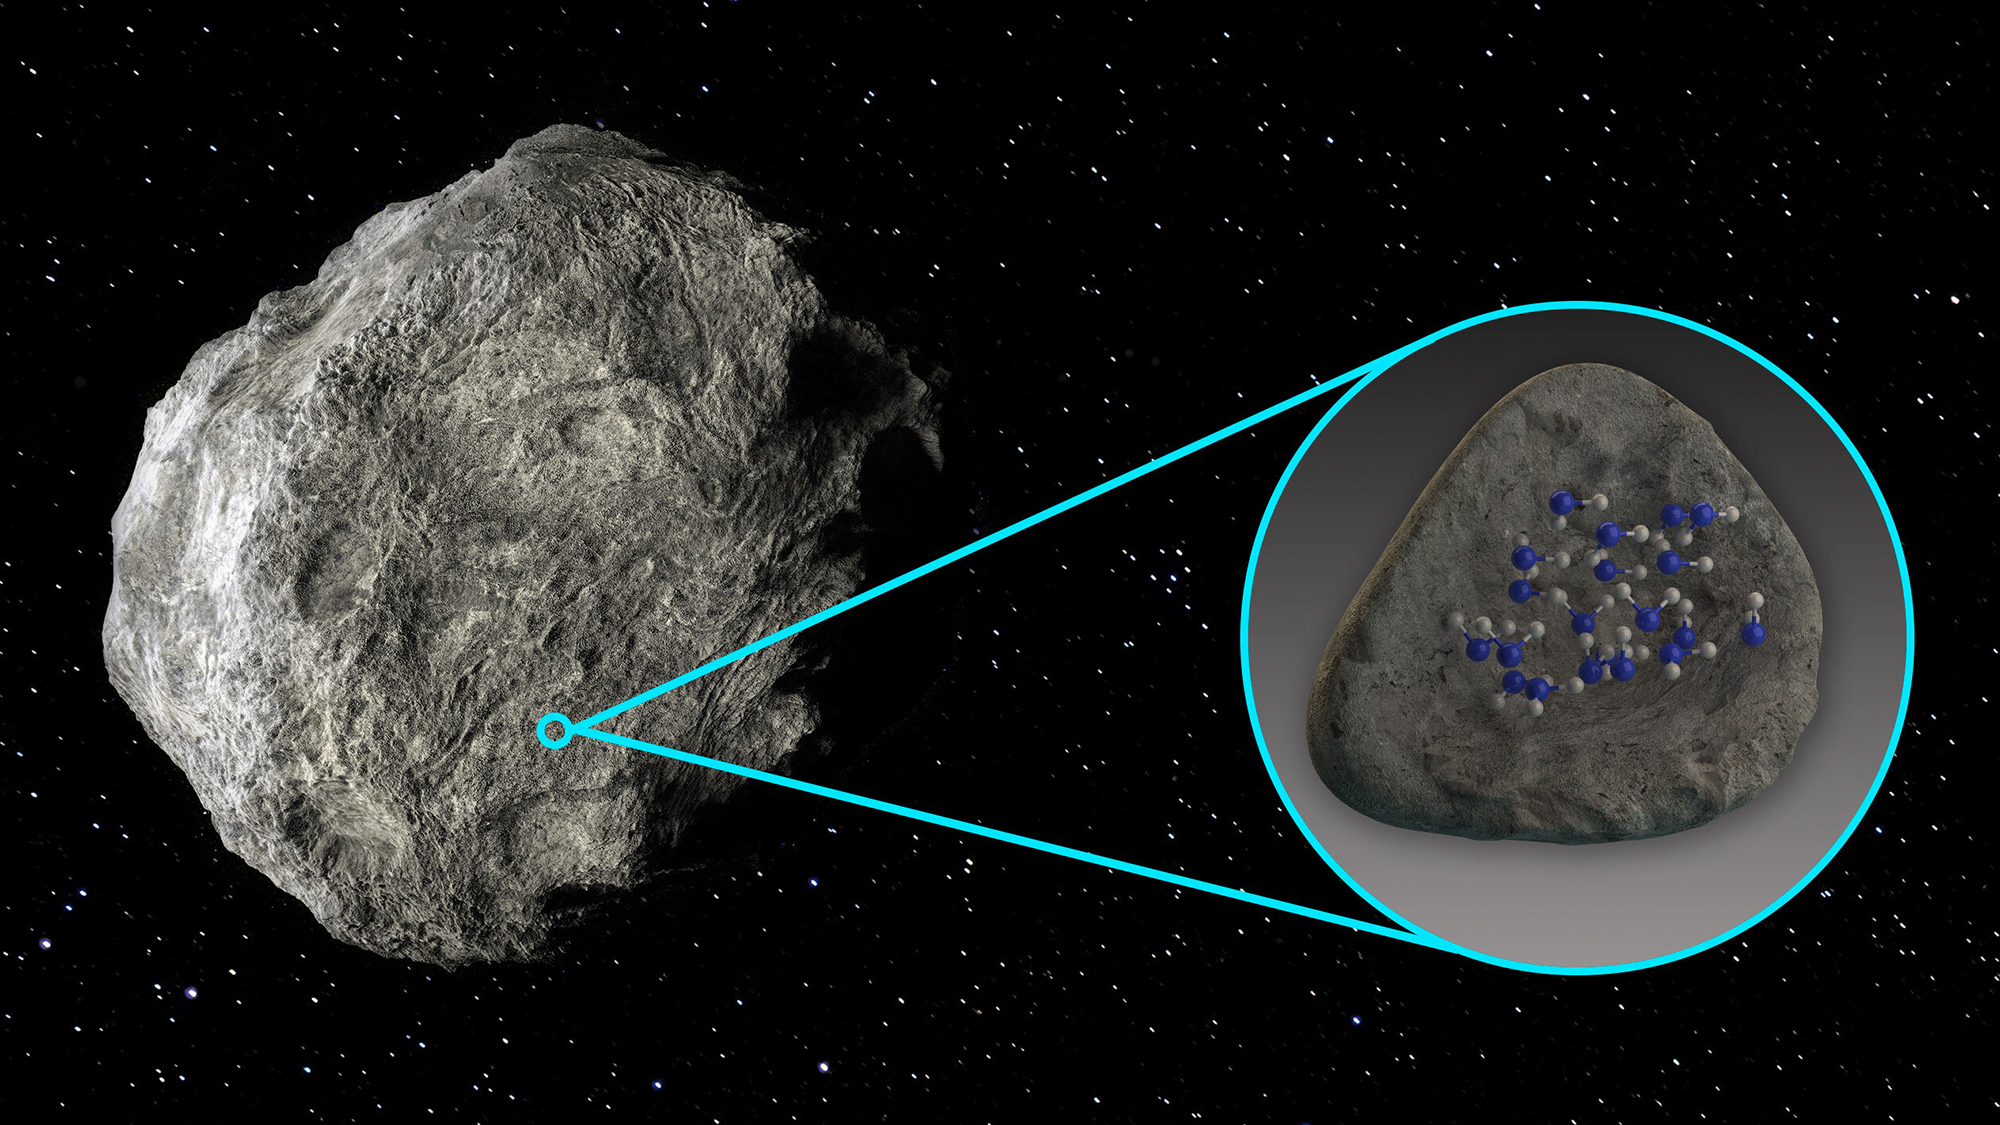 Water molecules detected on the surface of an asteroid in space for the first time